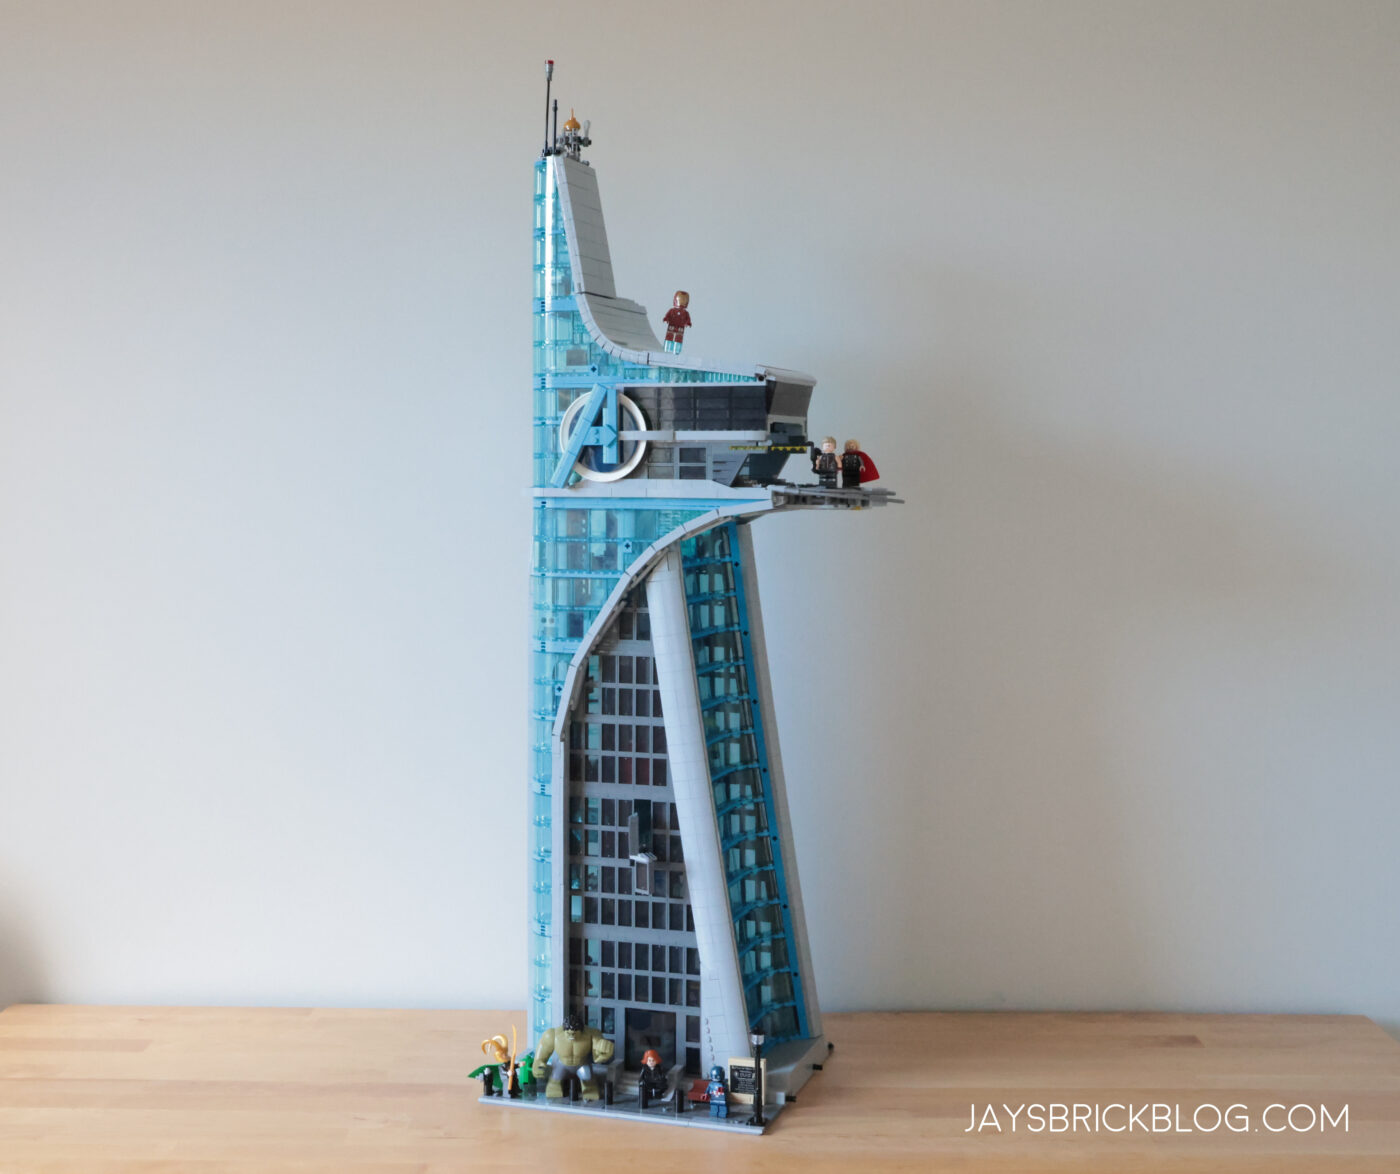 Just how tall is the LEGO Avengers Tower?12